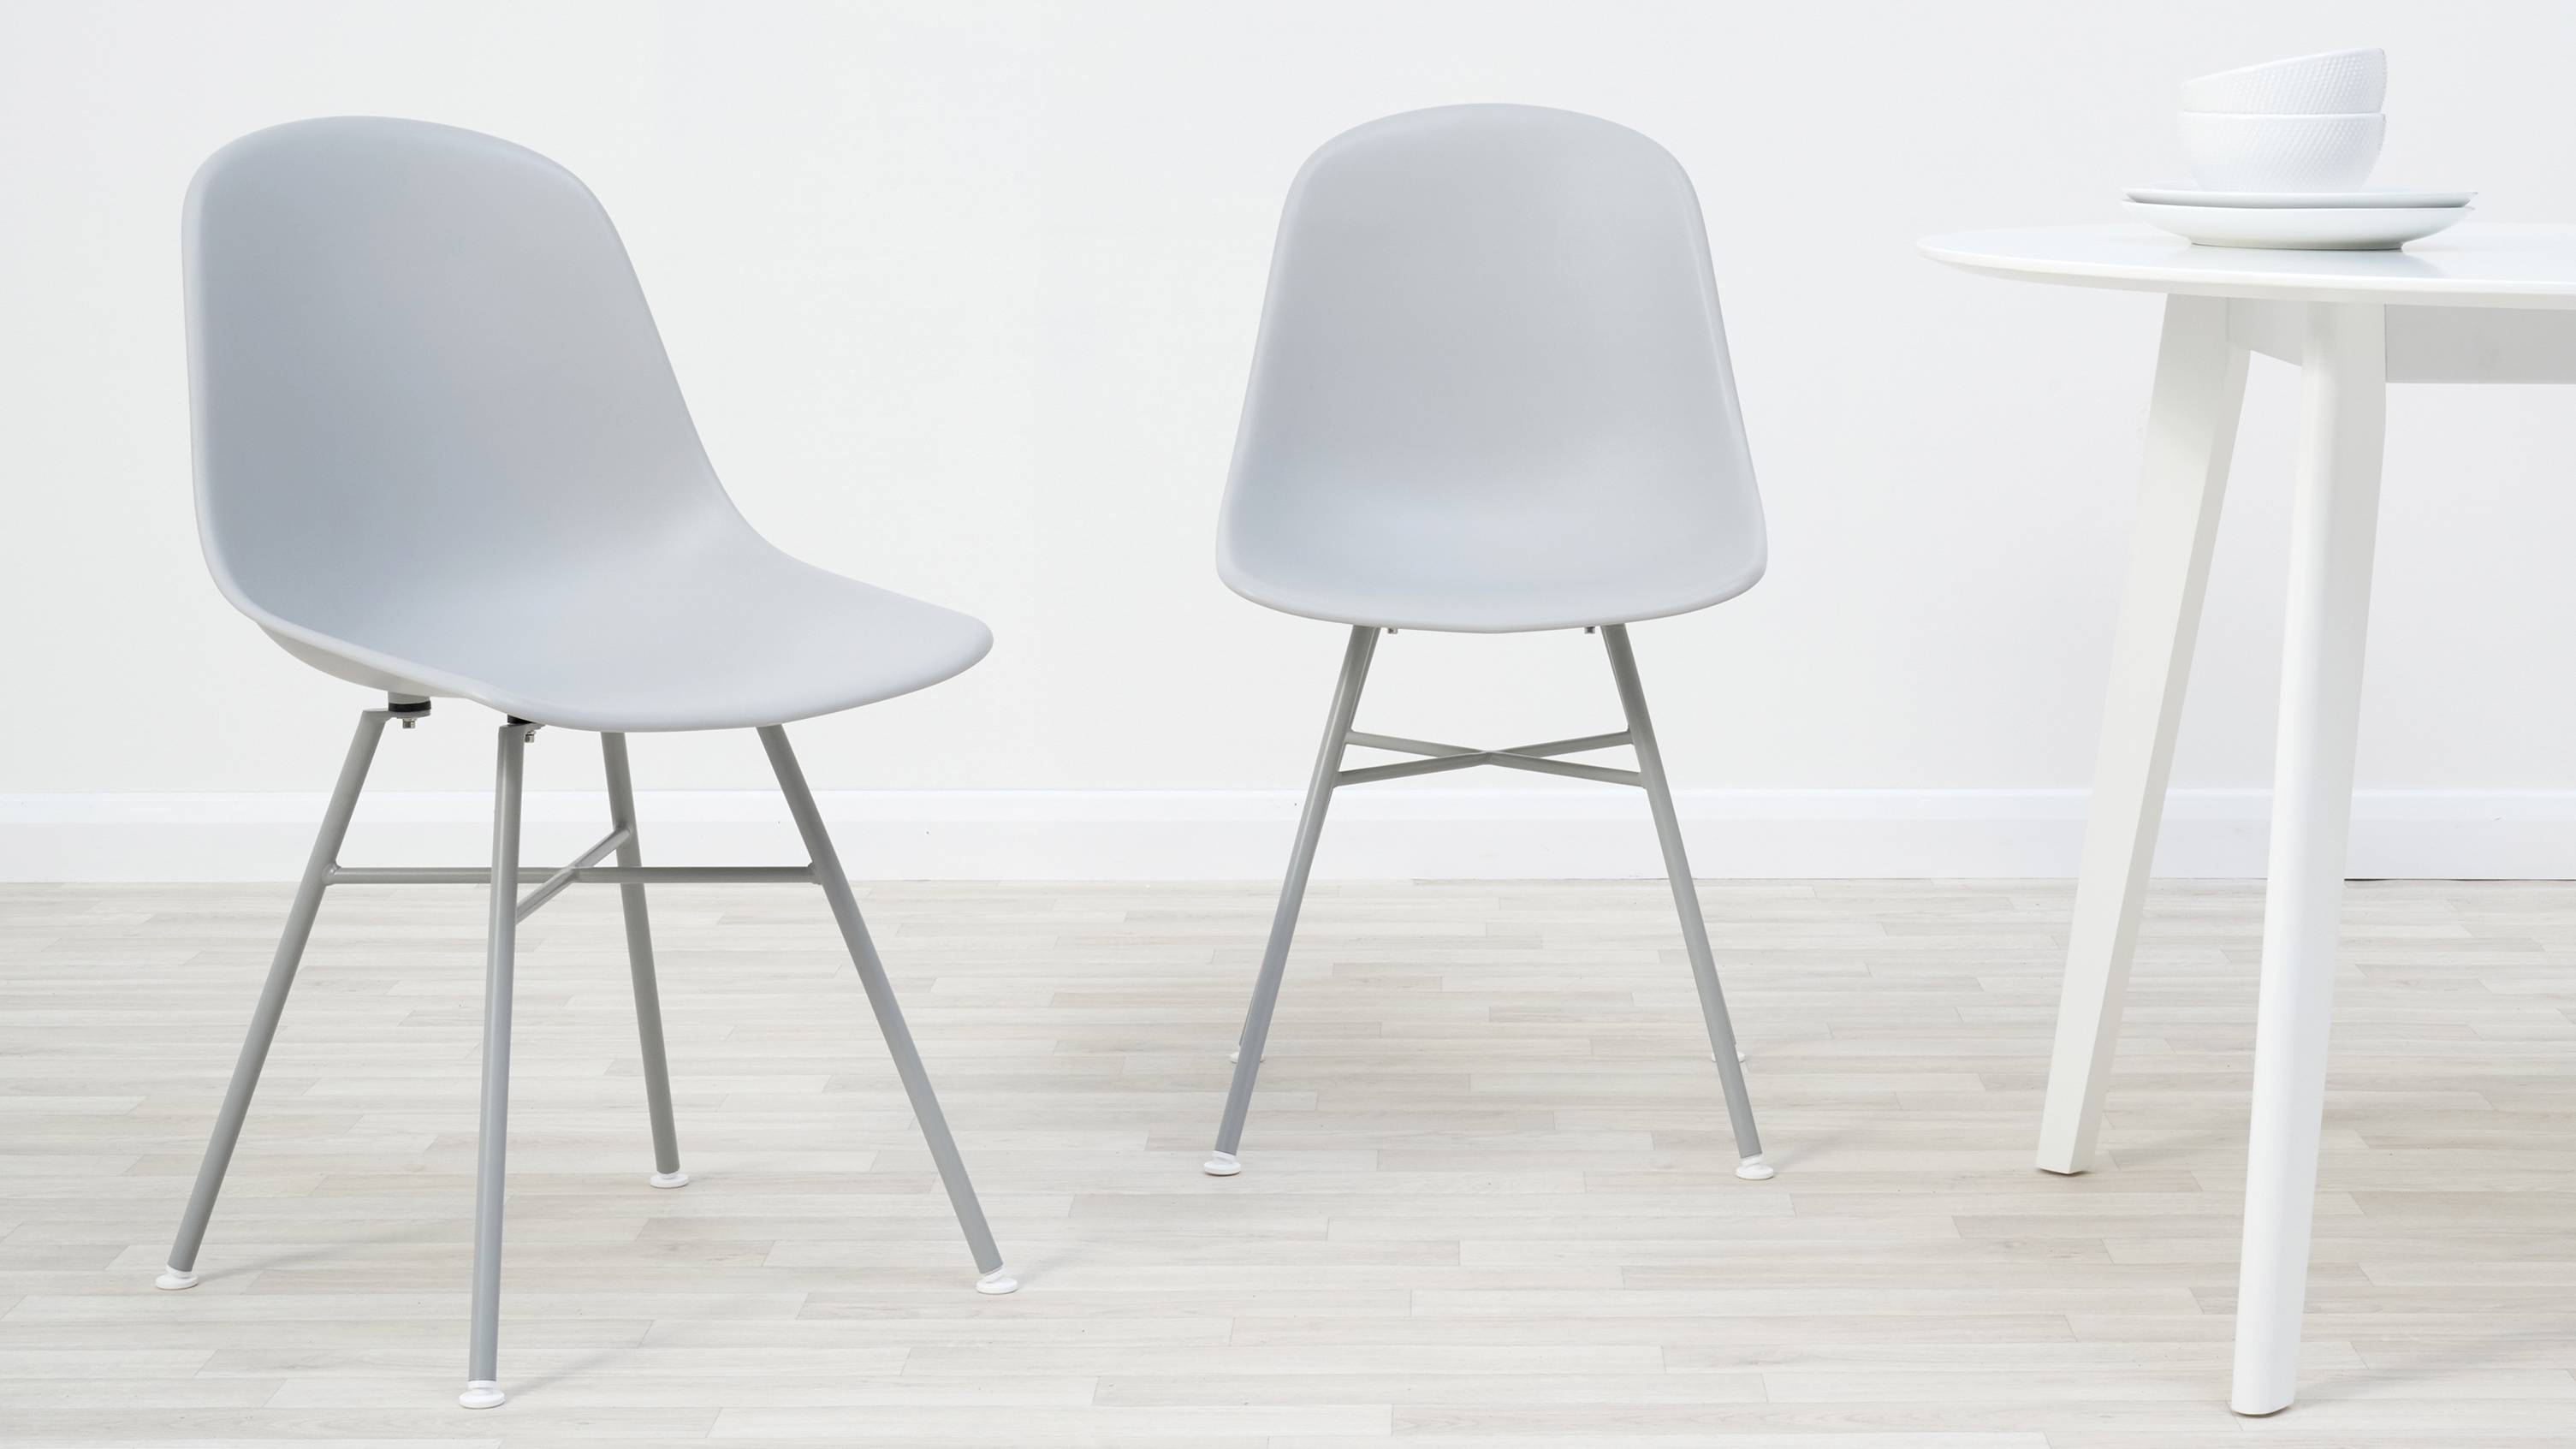 Moulded plastic dining chairs